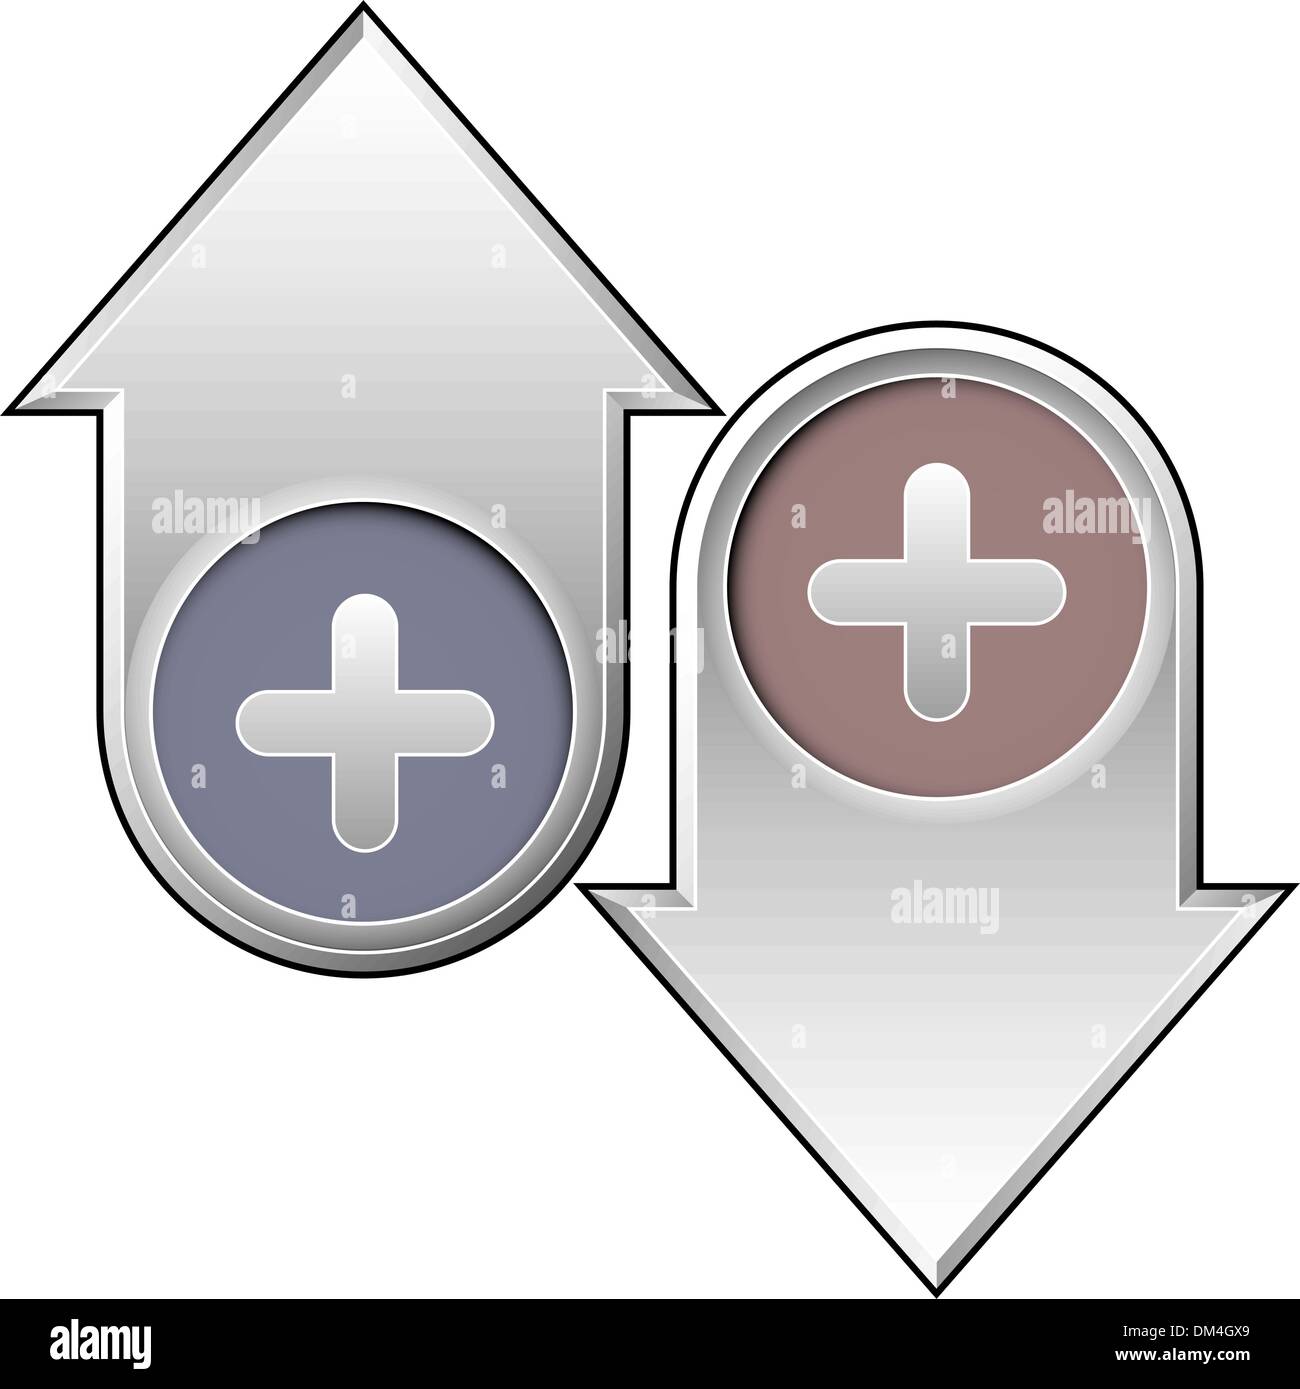 Plus or add icon on up and down arrows Stock Vector